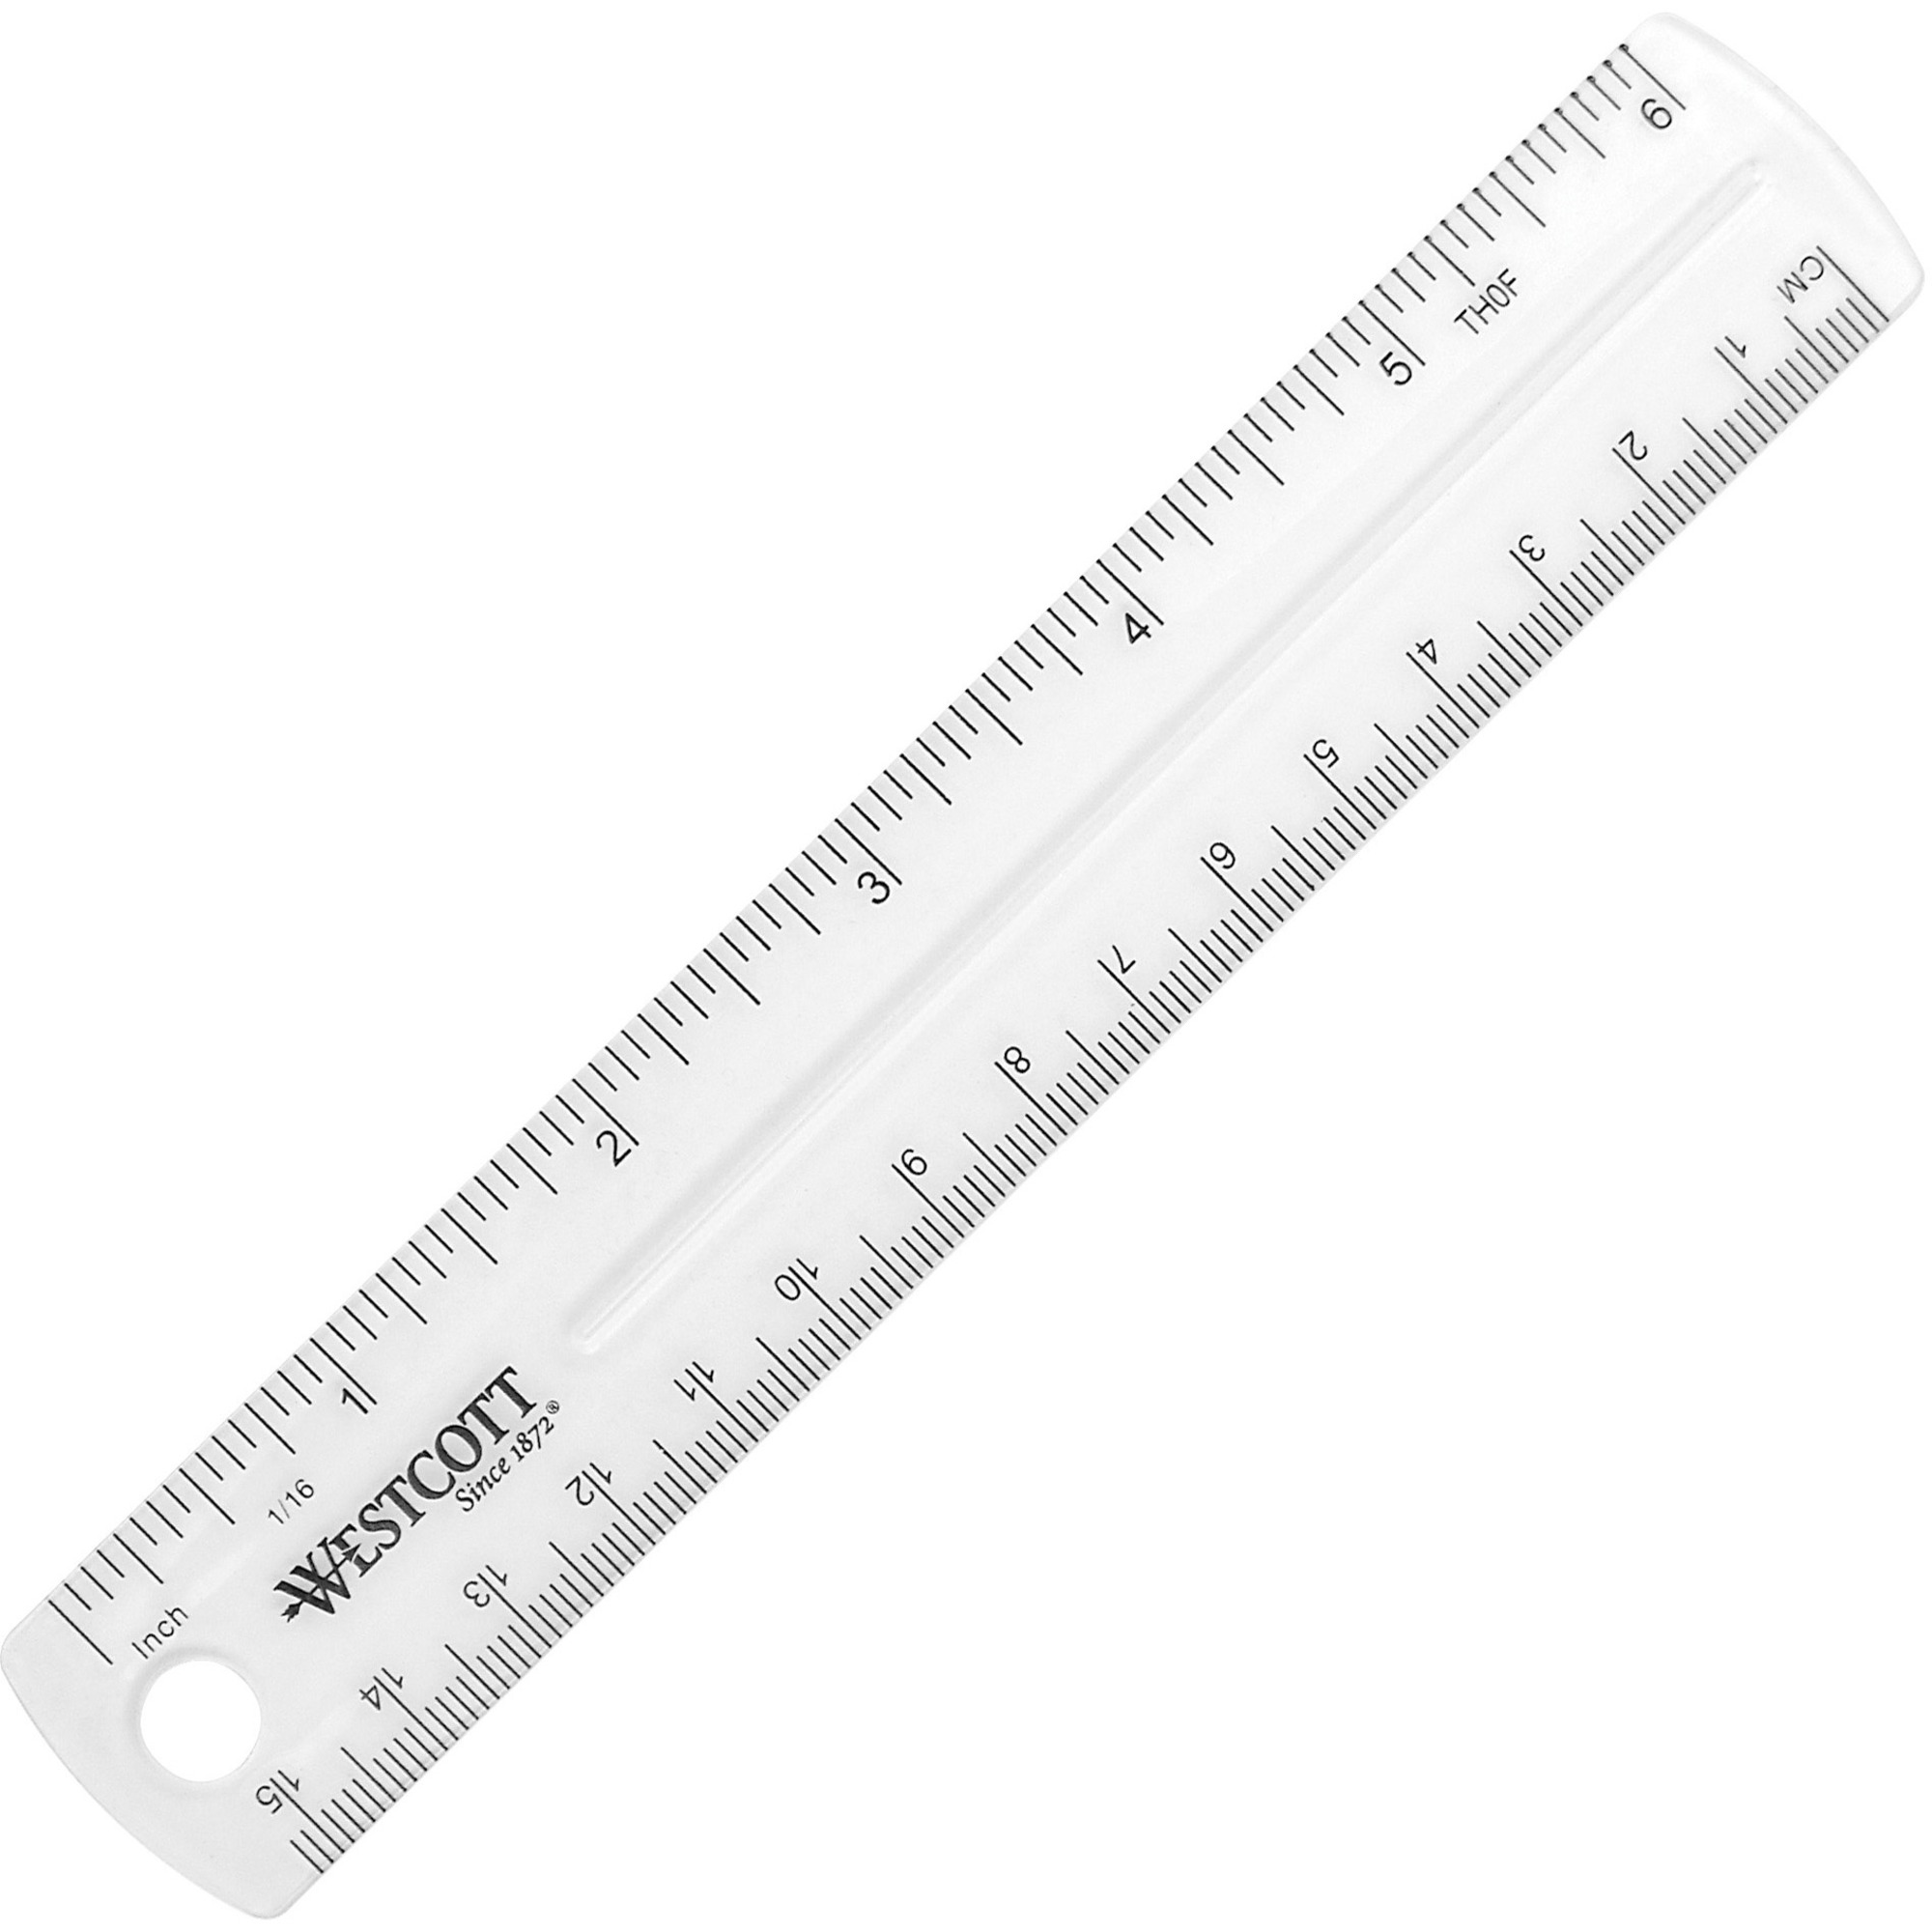 life size inches measuring ruler